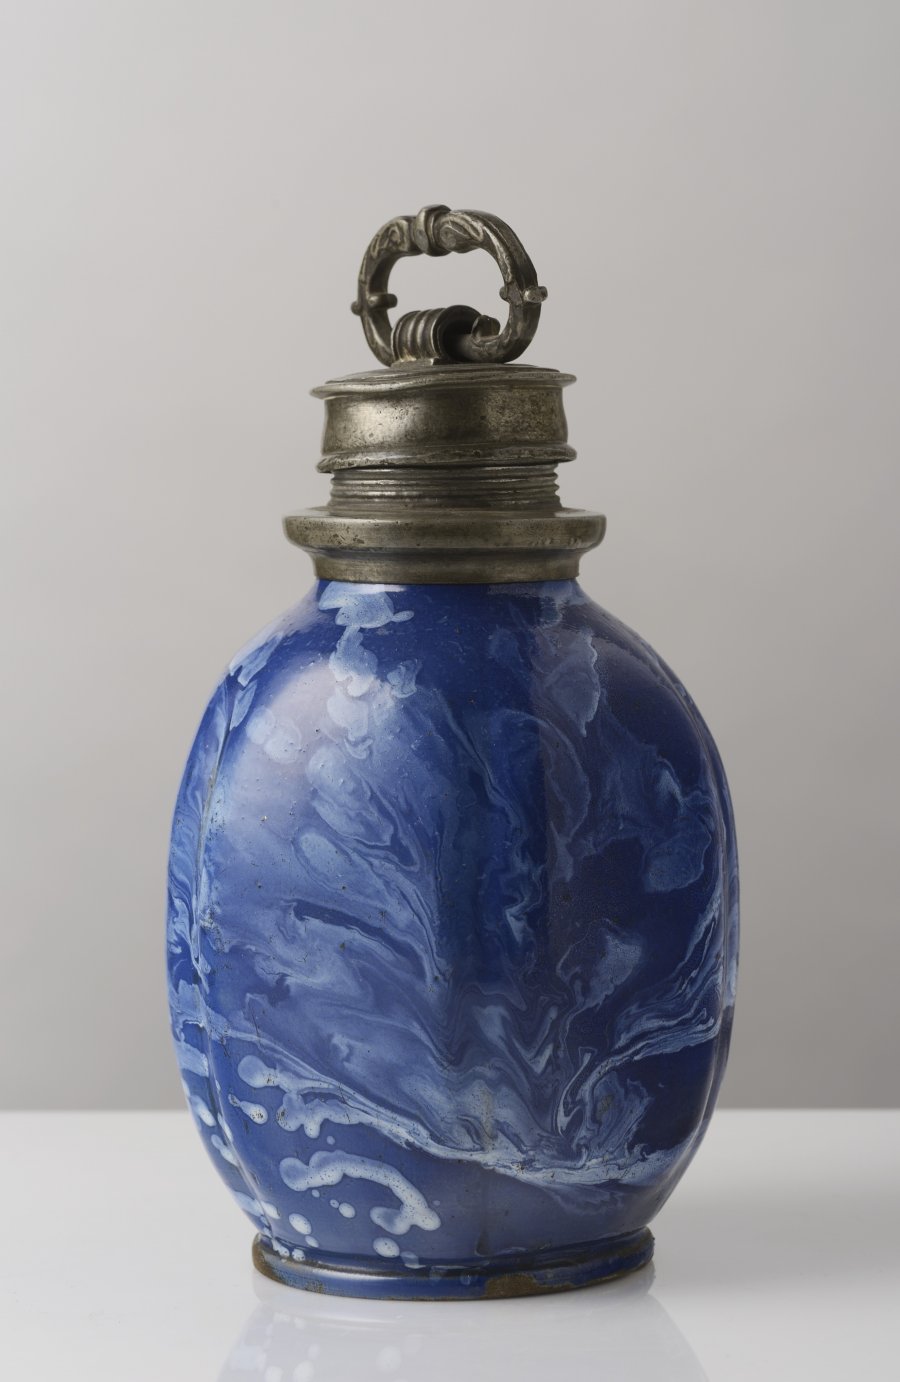 A Habán Bottle with a Pewter Screw Top